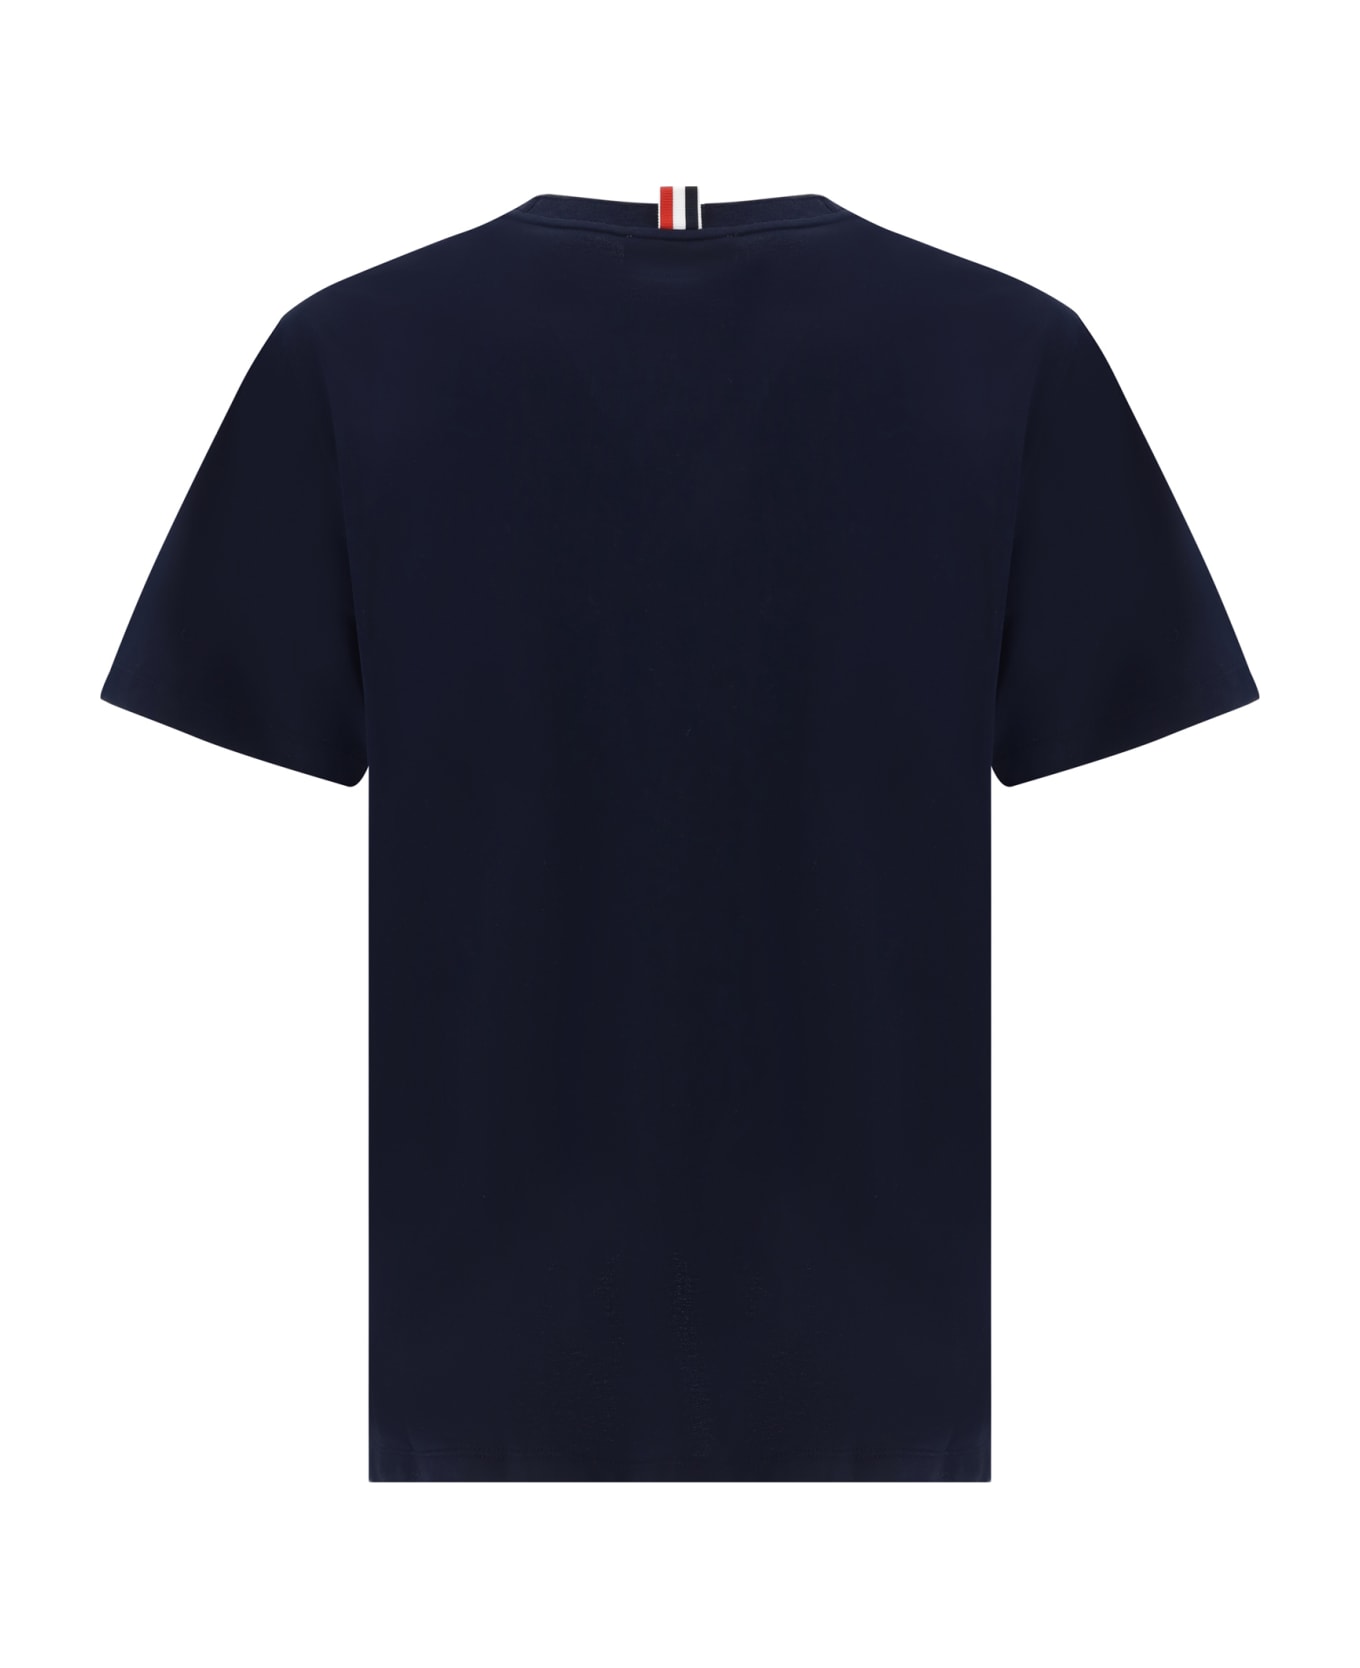 Thom Browne Relaxed Fit S/s Tee - Blue